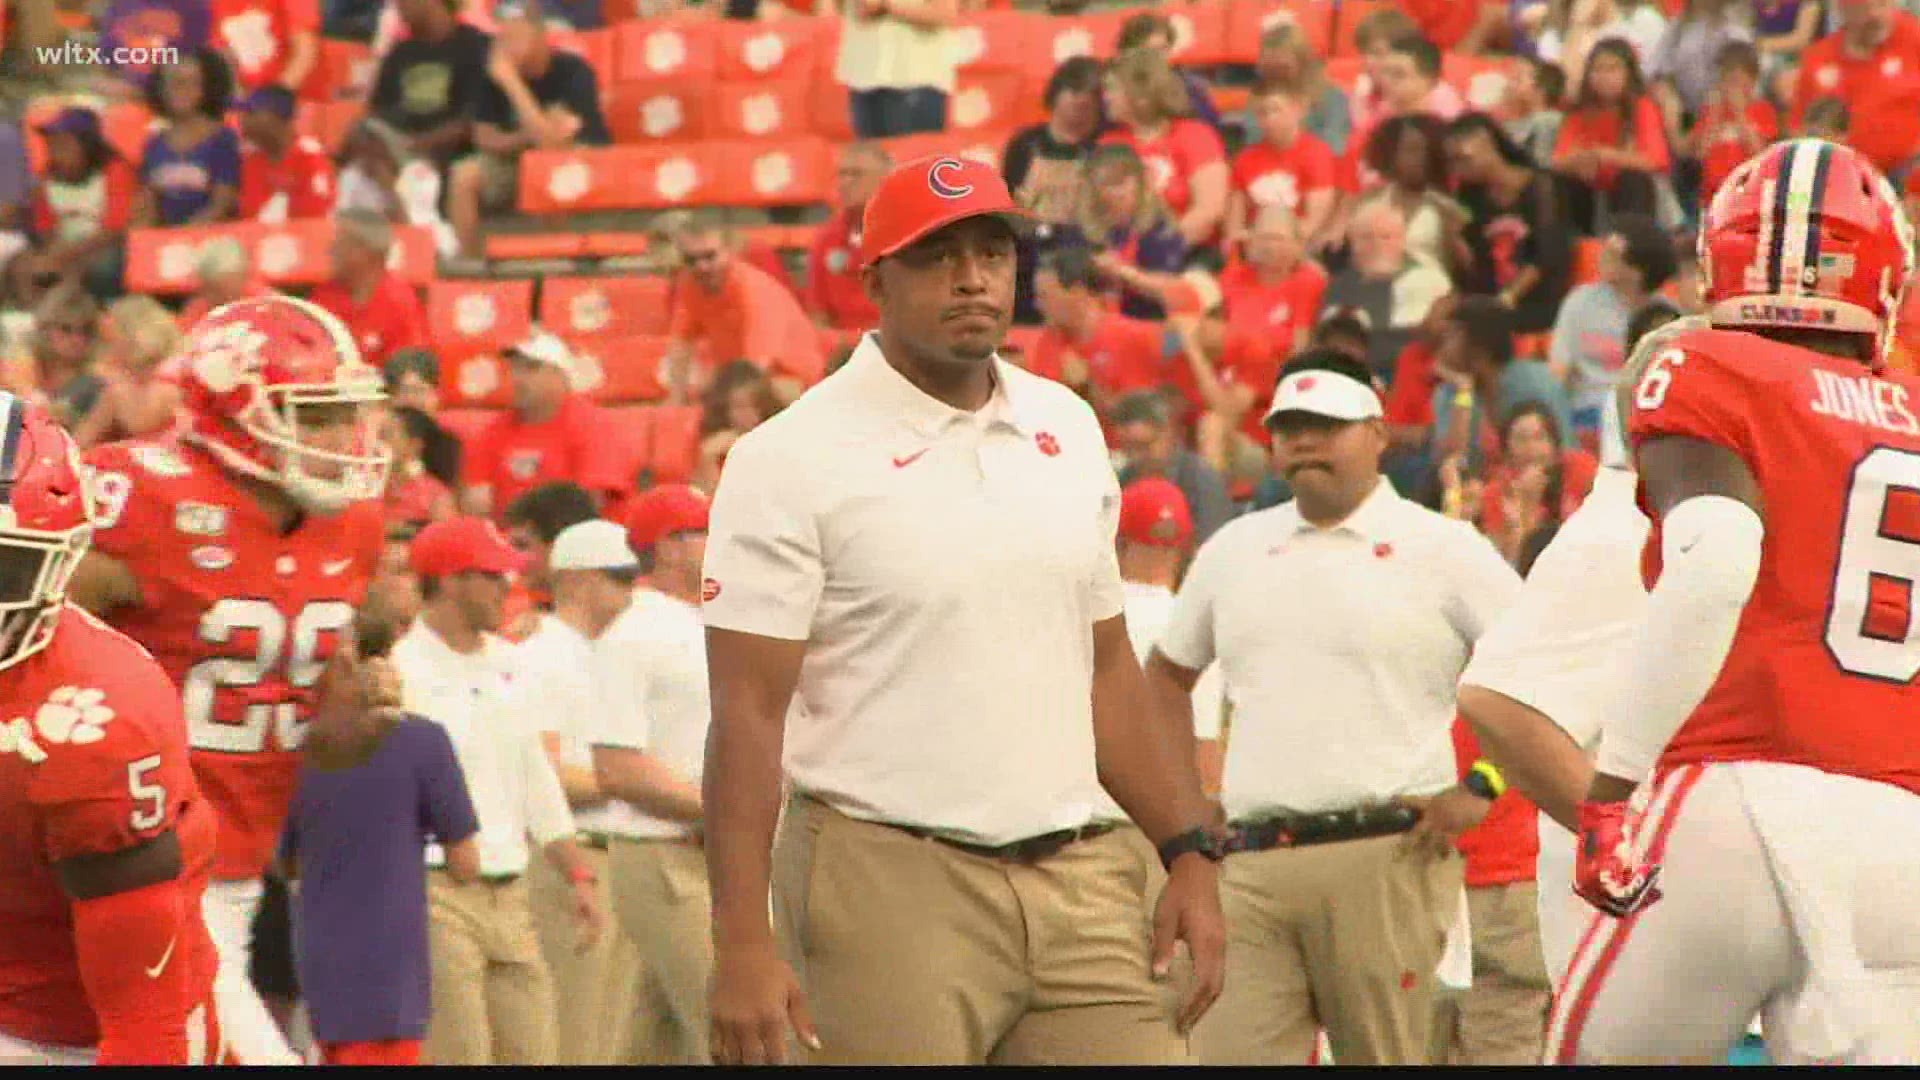 Clemson assistant coach Tony Elliott is now the only offensive coordinator on the Tiger coaching staff. He makes his debut in that capacity this week.